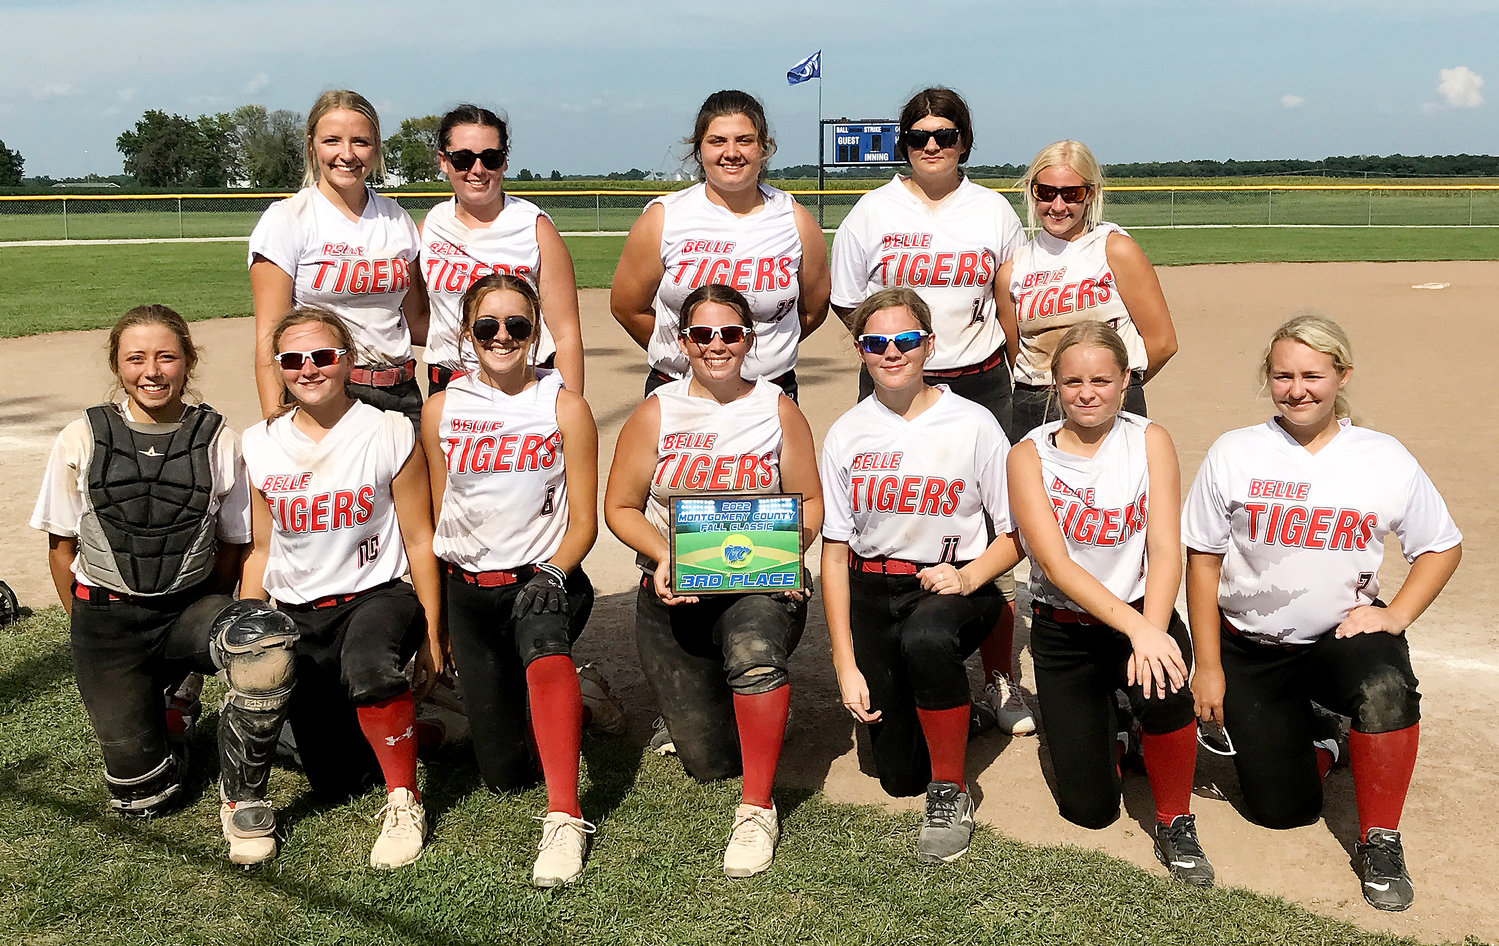 Belle Lady Tiger softball team members gather for a team picture with the third-place plaque from the Montgomery County Fall Classic Softball Tournament at Montgomery County High School.